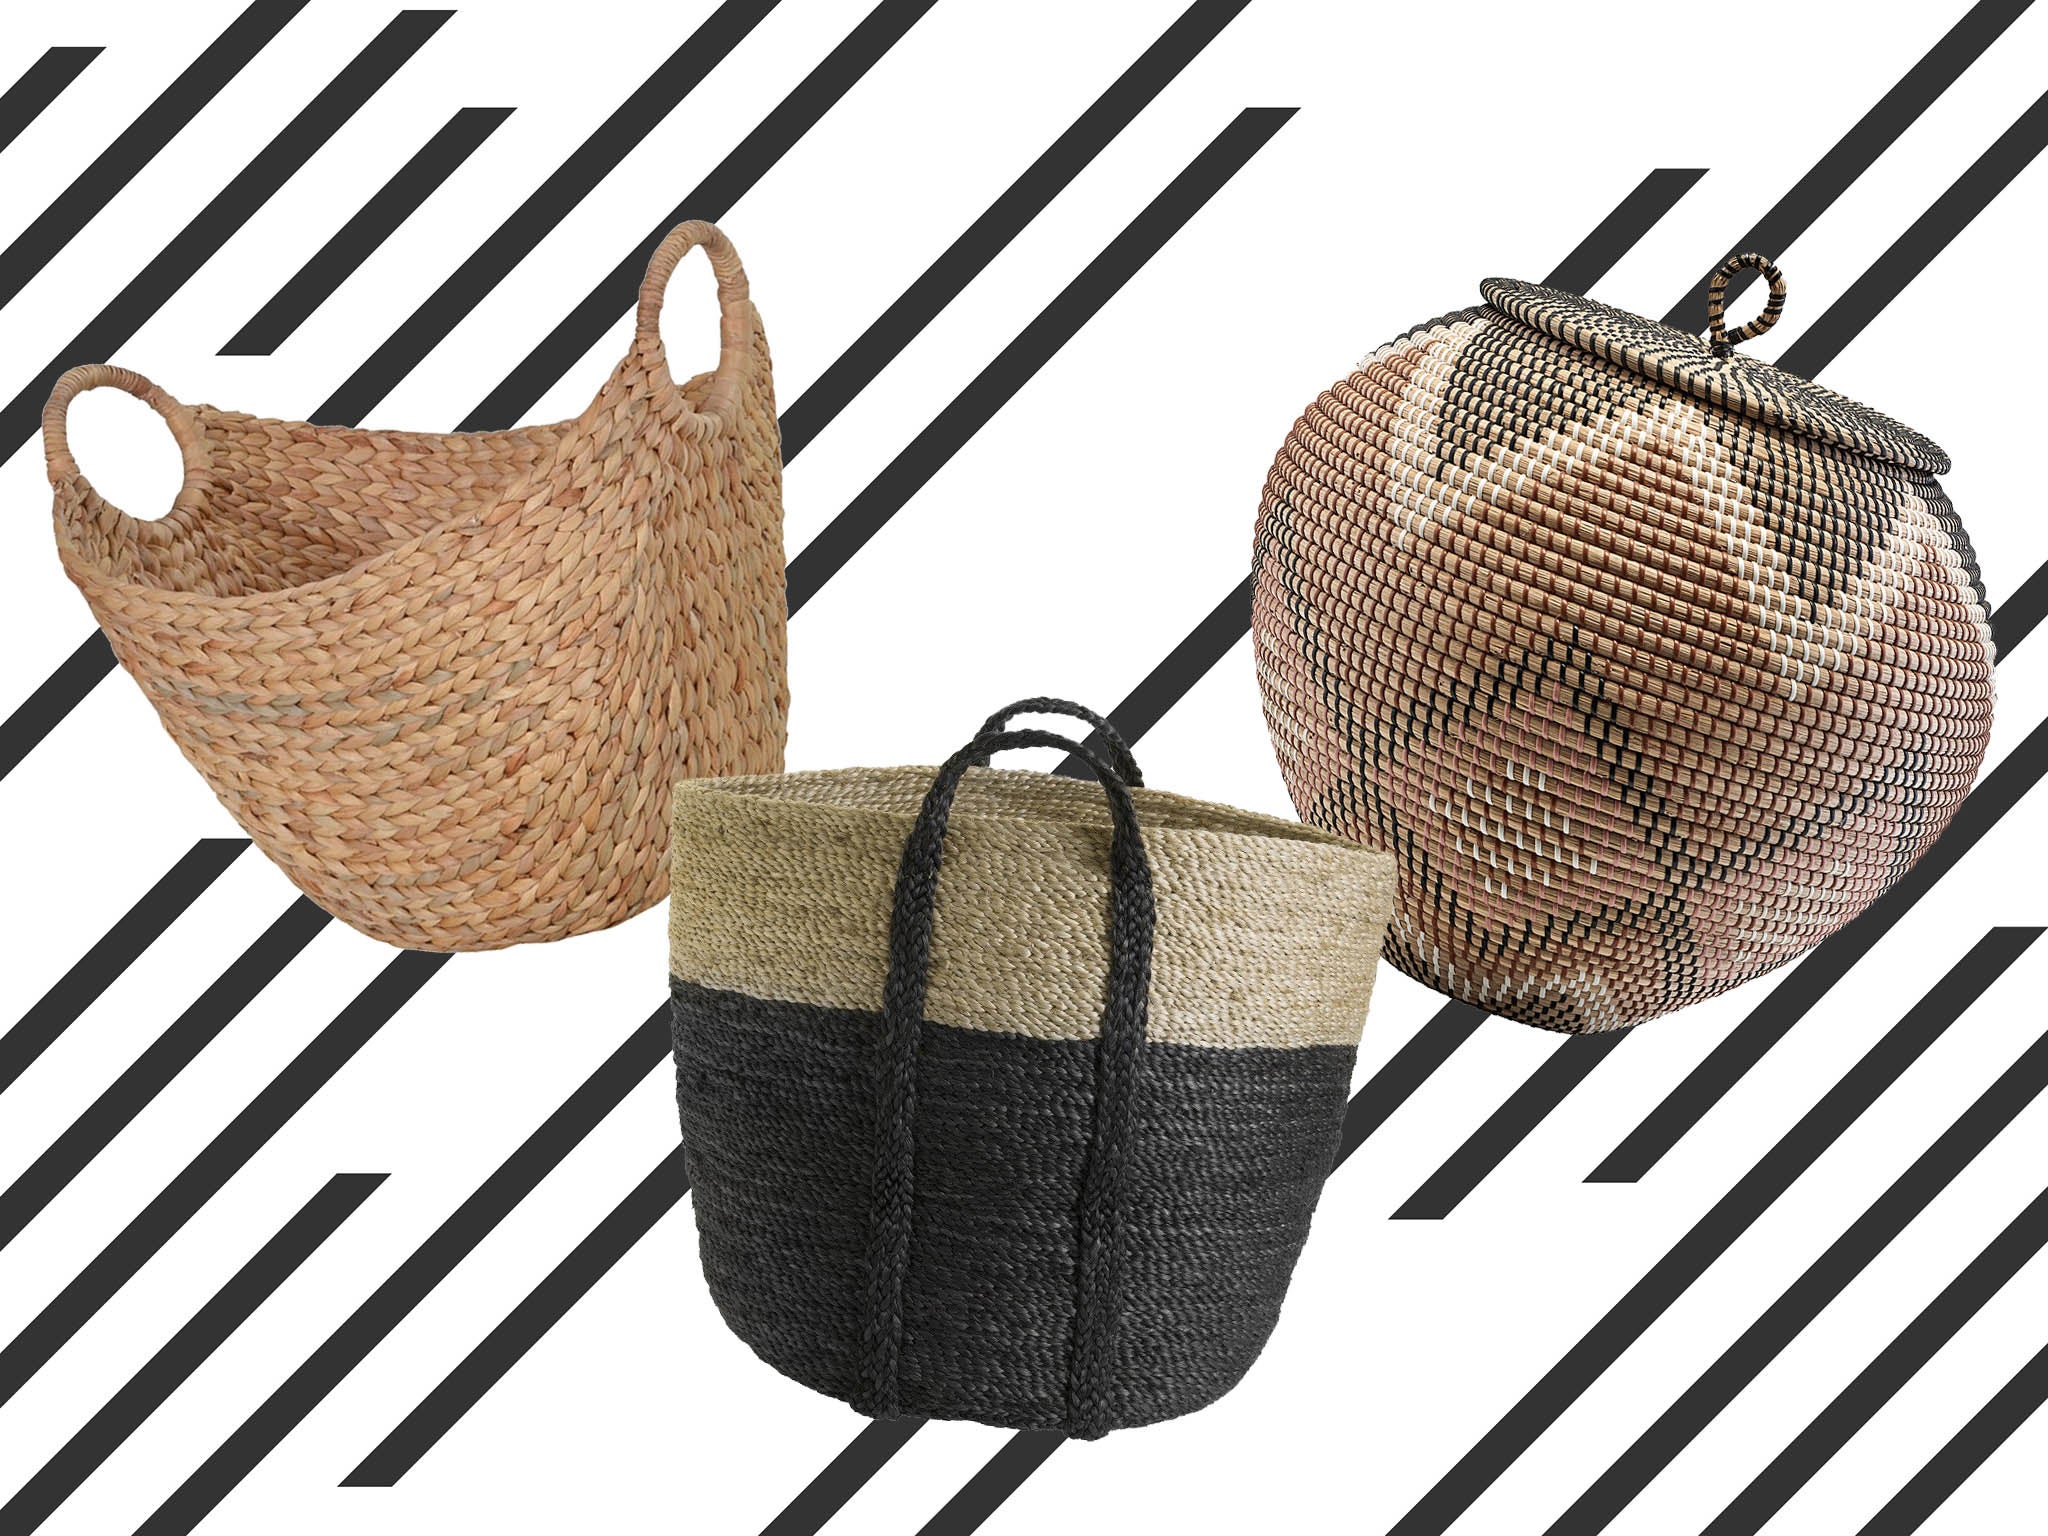 Unique Toilet Paper Basket Woven from Seagrass Bathroom Organiser Basket for Surfaces and Cupboards mDesign Bathroom Storage Basket Natural